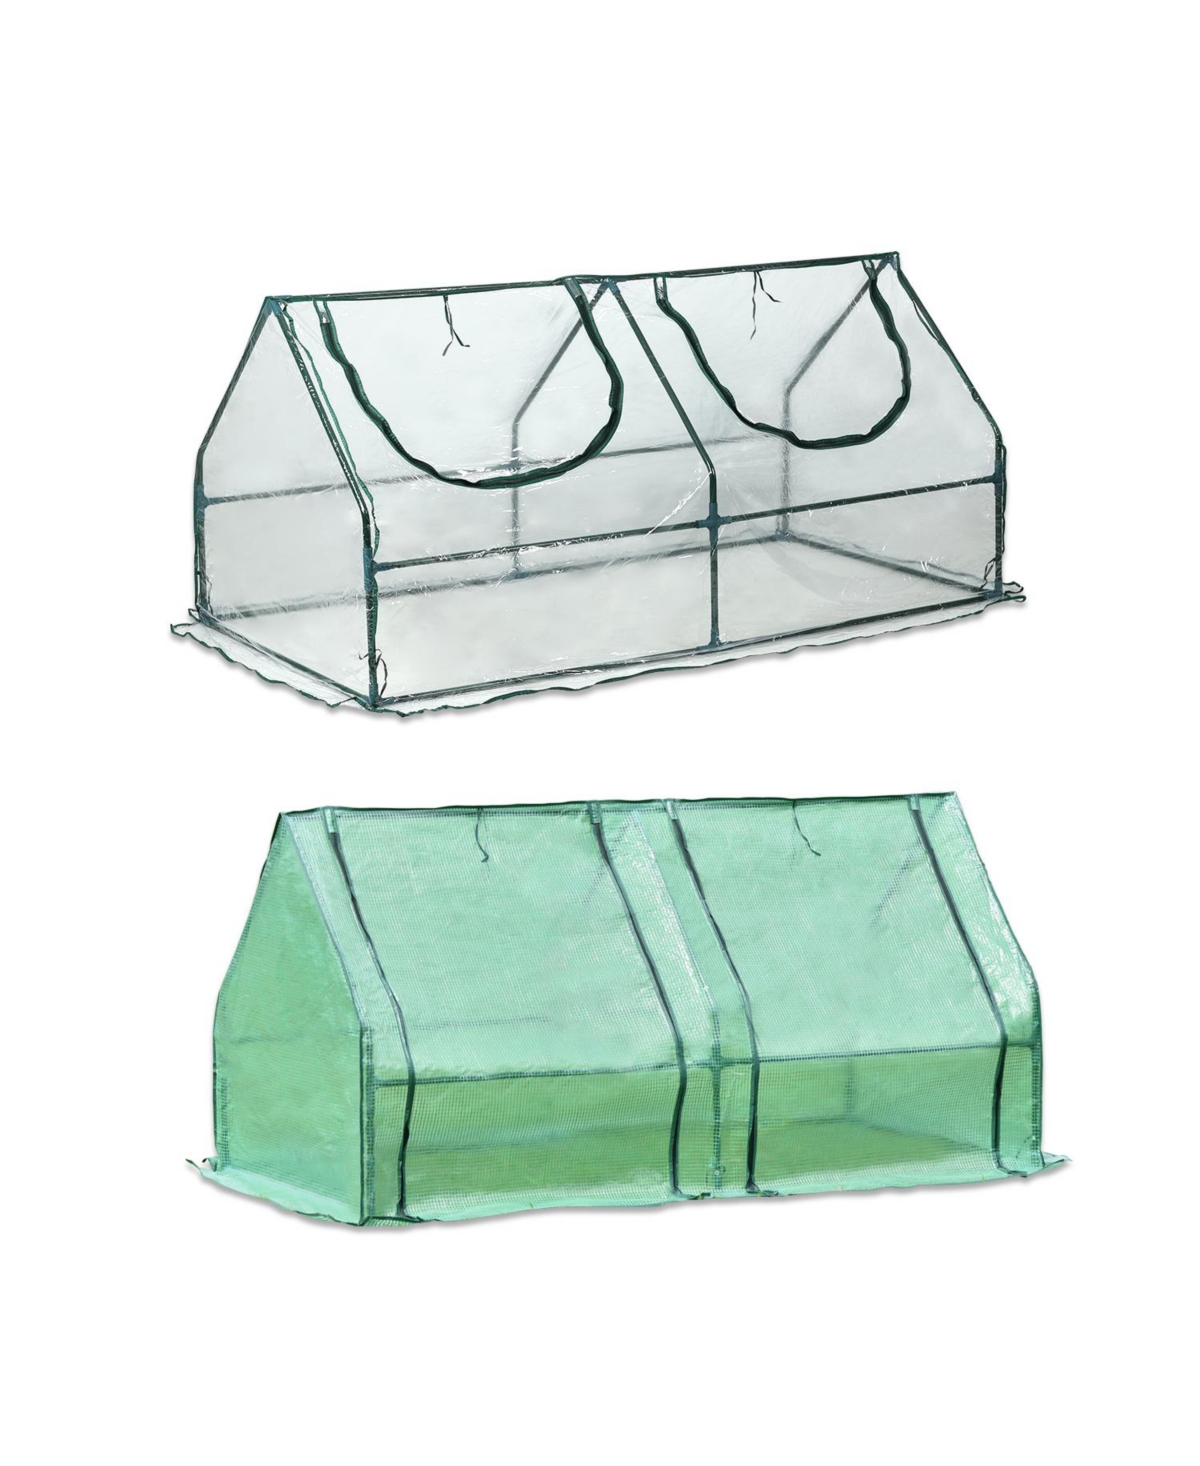 Double Cover 6ft.3ft.3ft. Mini Greenhouse Portable Greenhouse Two Zippered Doors - Green